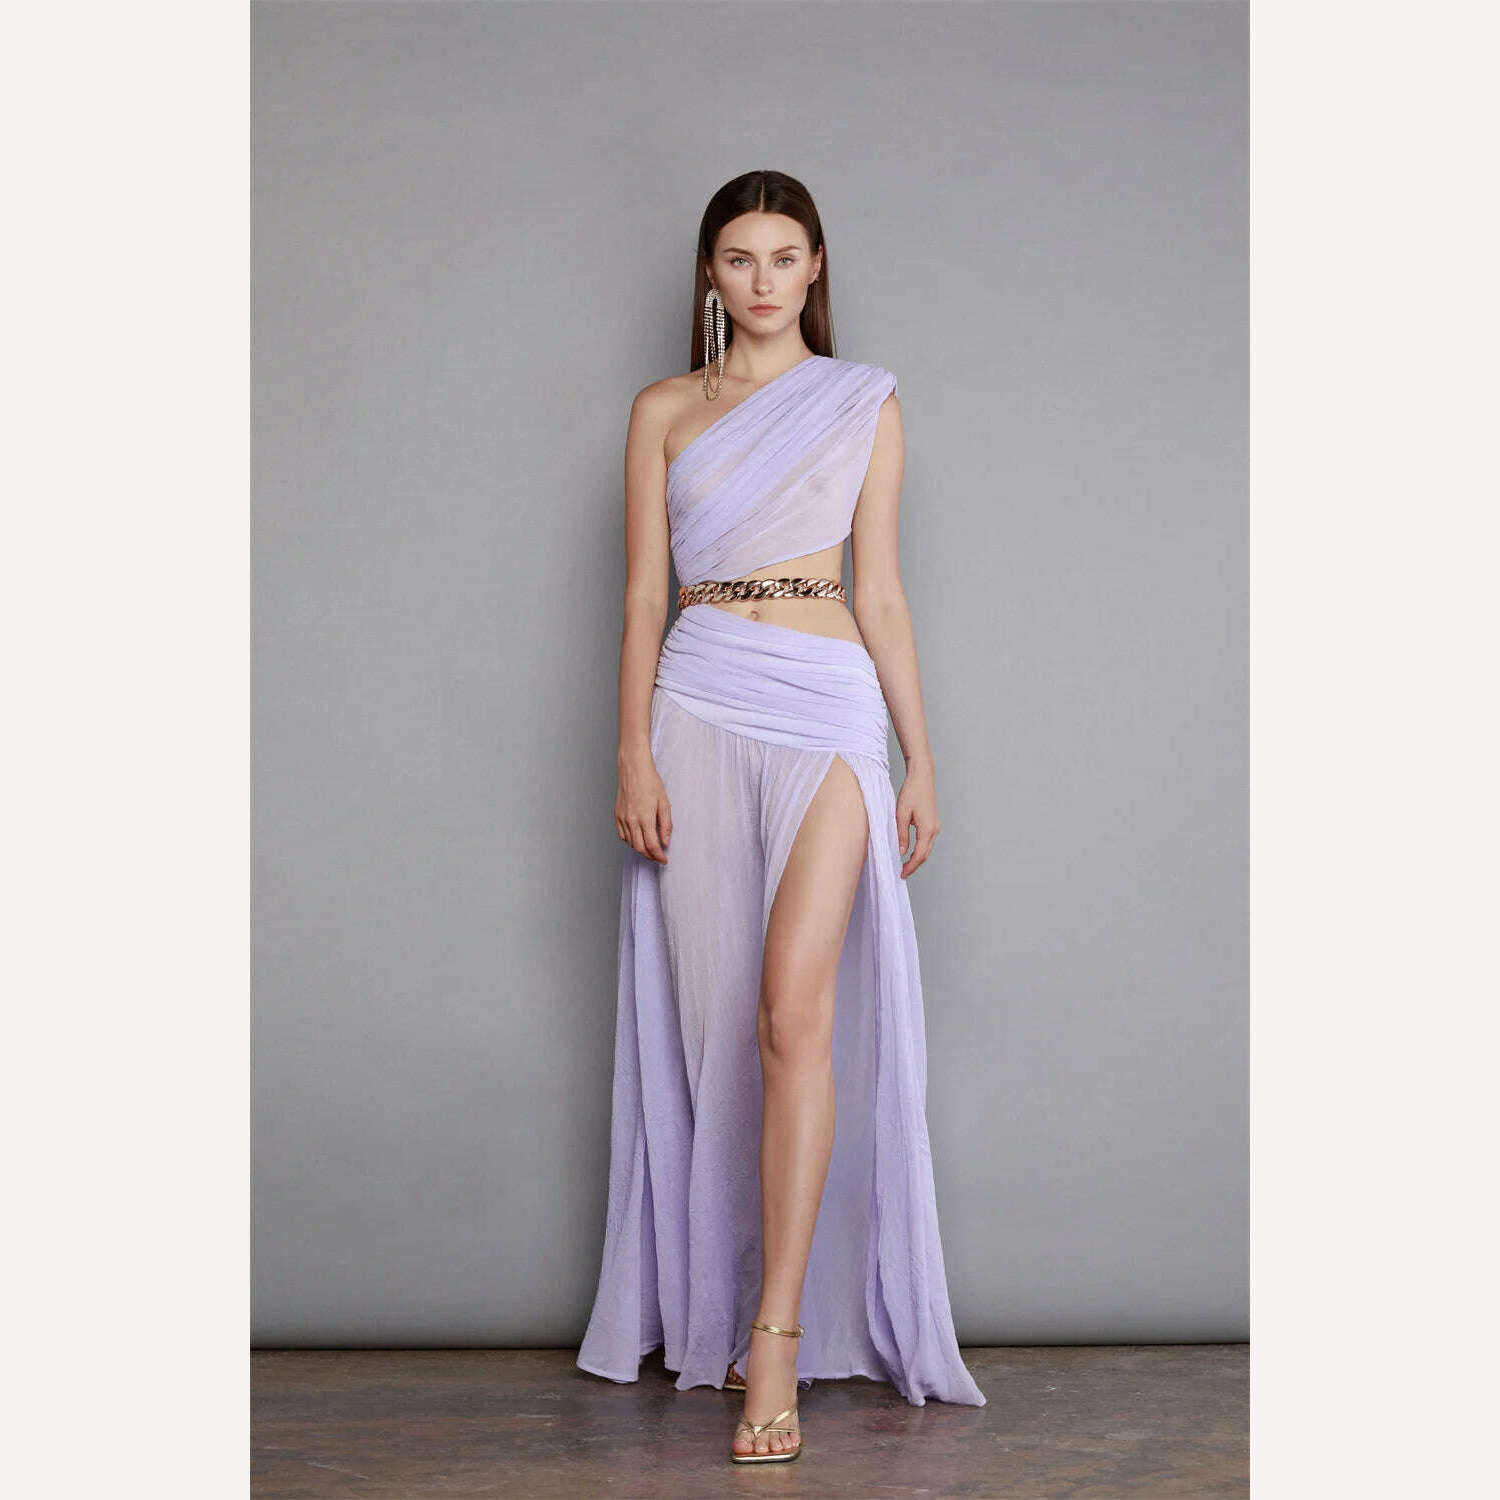 KIMLUD, New Summer Violet Color Sexy One Shoulder Golden Chain EXpose Waist High Split Floor Lenght Dress Celebrity Evening Party Outfit, Lavender / XS, KIMLUD Women's Clothes